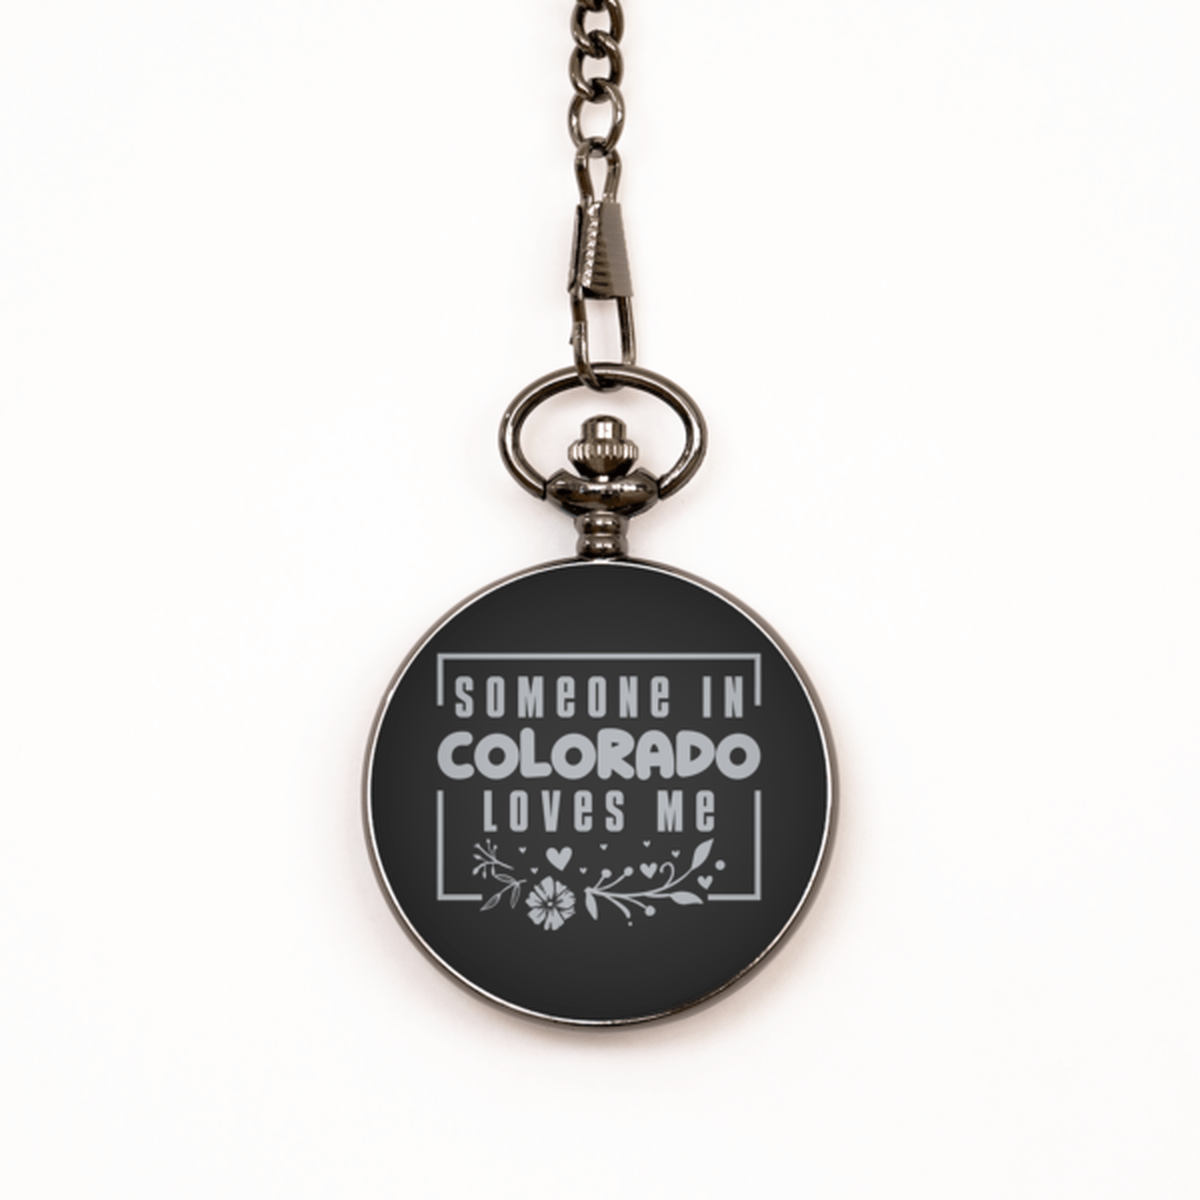 Cute Colorado Black Pocket Watch, Someone in Colorado Loves Me, Best Birthday Gifts from Colorado Friends & Family